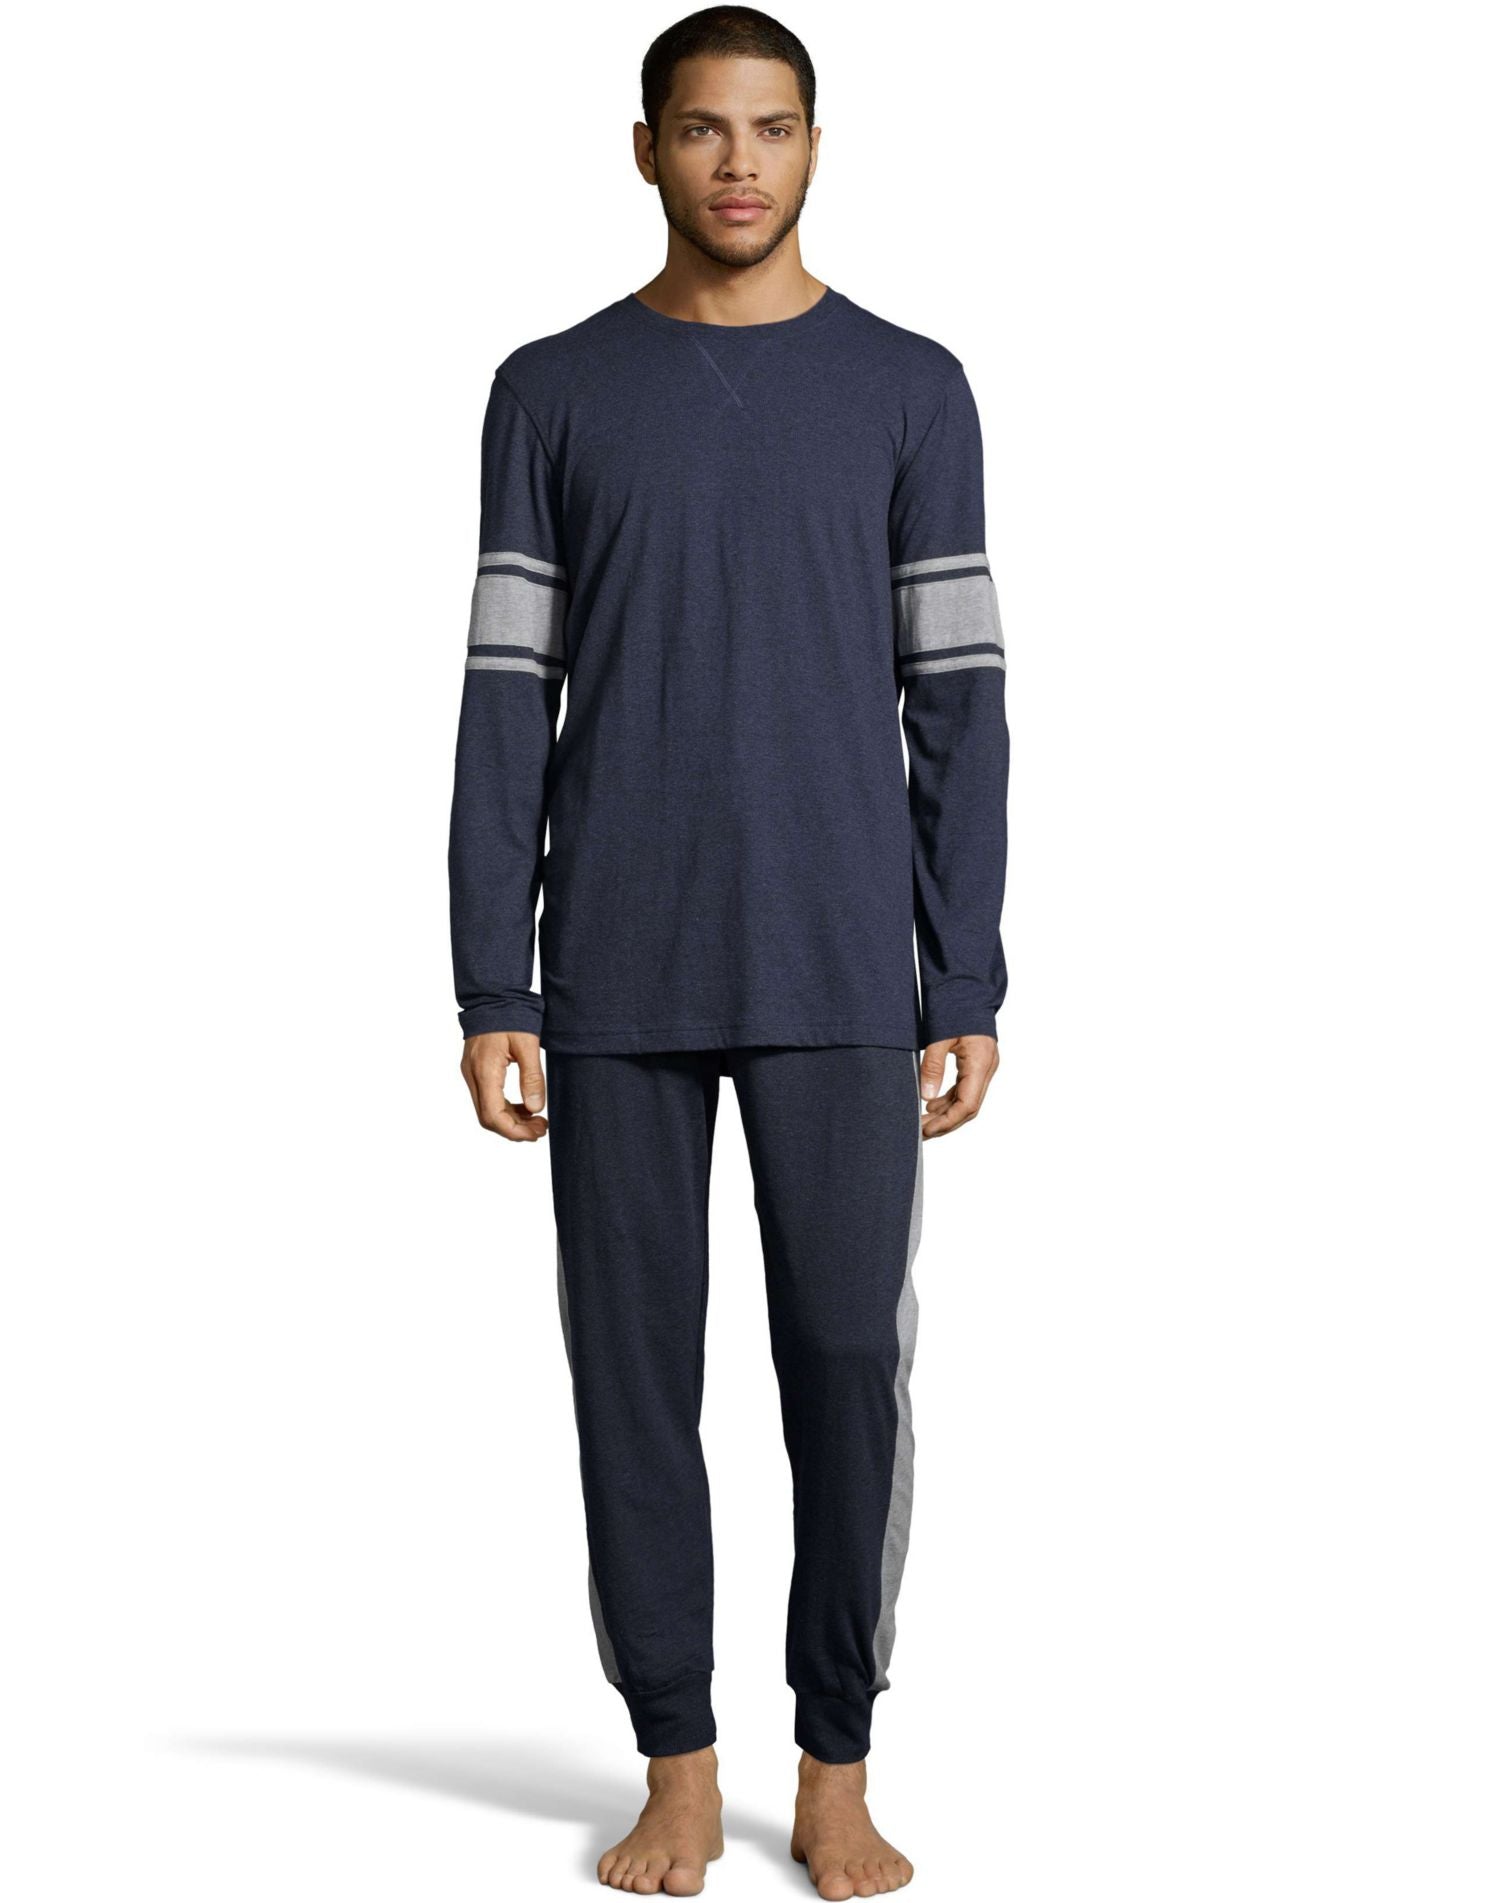 P4165 - Hanes Mens 1901 Heritage Striped Sleeve Crewneck and Jogger ...